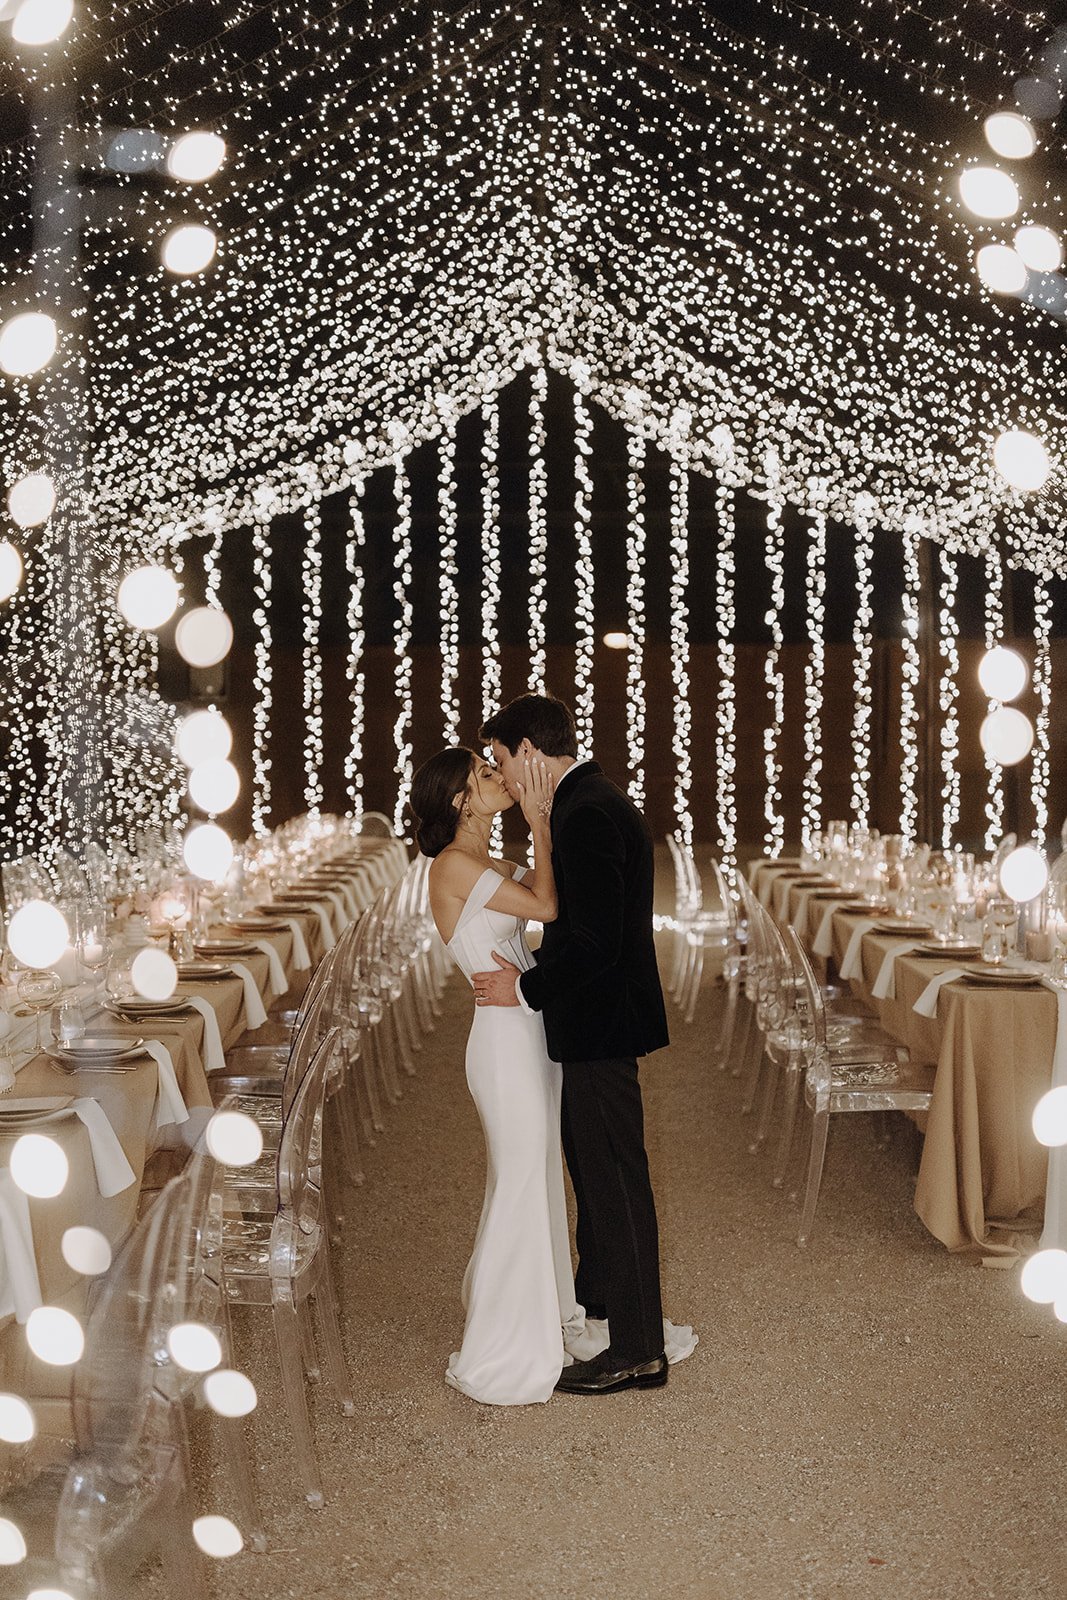 Bride and groom kissing under the twinkle light tent at their Persian wedding reception